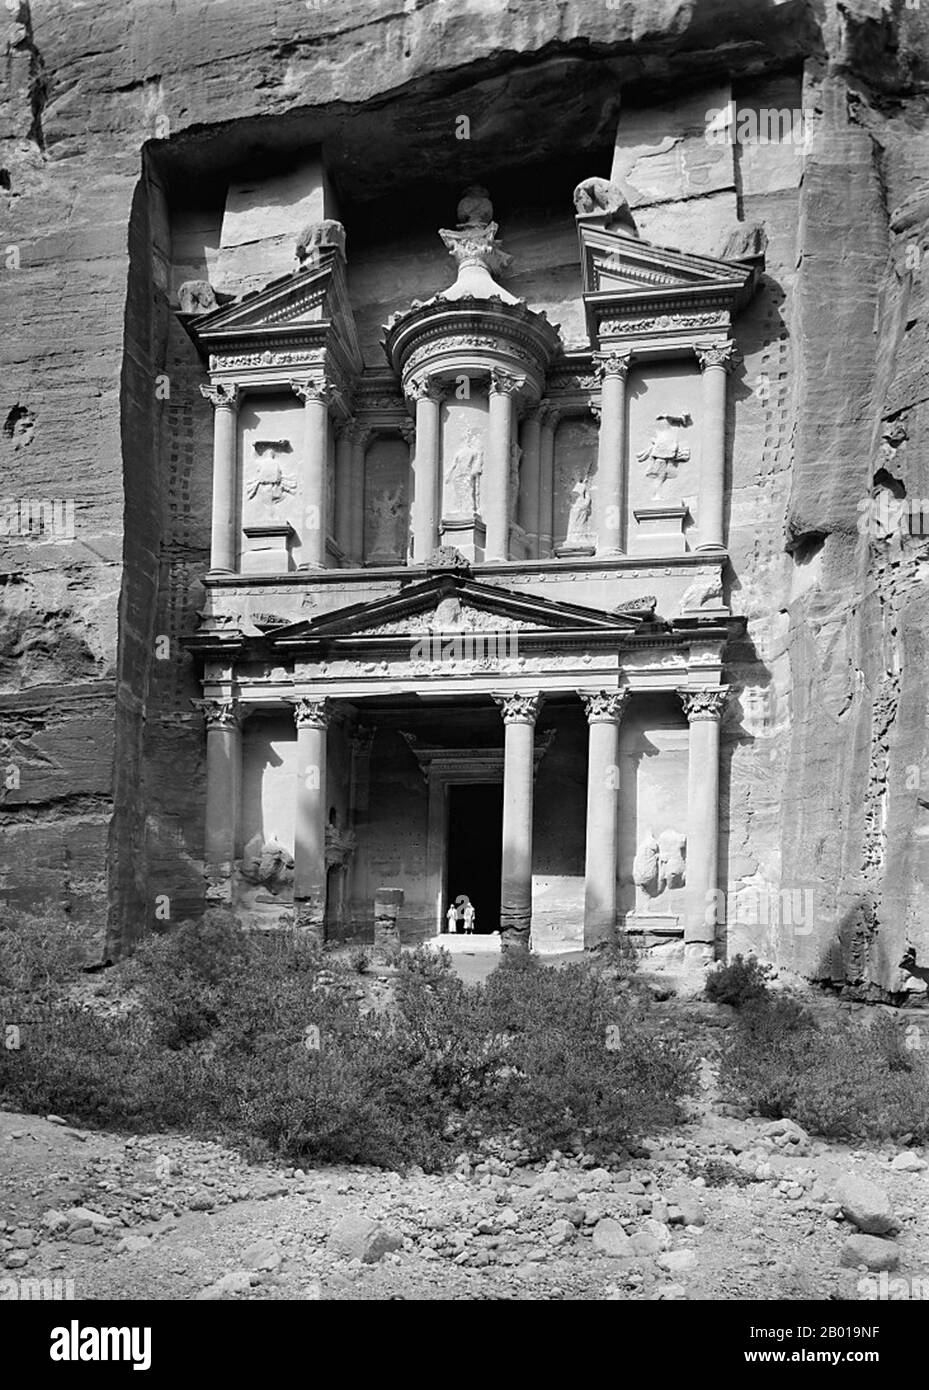 Jordan: Al Khazneh ('The Treasury') at Petra, c. 1898-1914.  Petra (Al-Batrā) is a historical and archaeological city in the Jordanian governorate of Ma'an that is known for its rock cut architecture and water conduits system. Established sometime around the 6th century BC as the capital city of the Nabataeans, it is a symbol of Jordan as well as its most visited tourism attraction. It lies on the slope of Mount Hor in a basin among the mountains which form the eastern flank of Arabah (Wadi Araba), the large valley running from the Dead Sea to the Gulf of Aqaba. Stock Photo